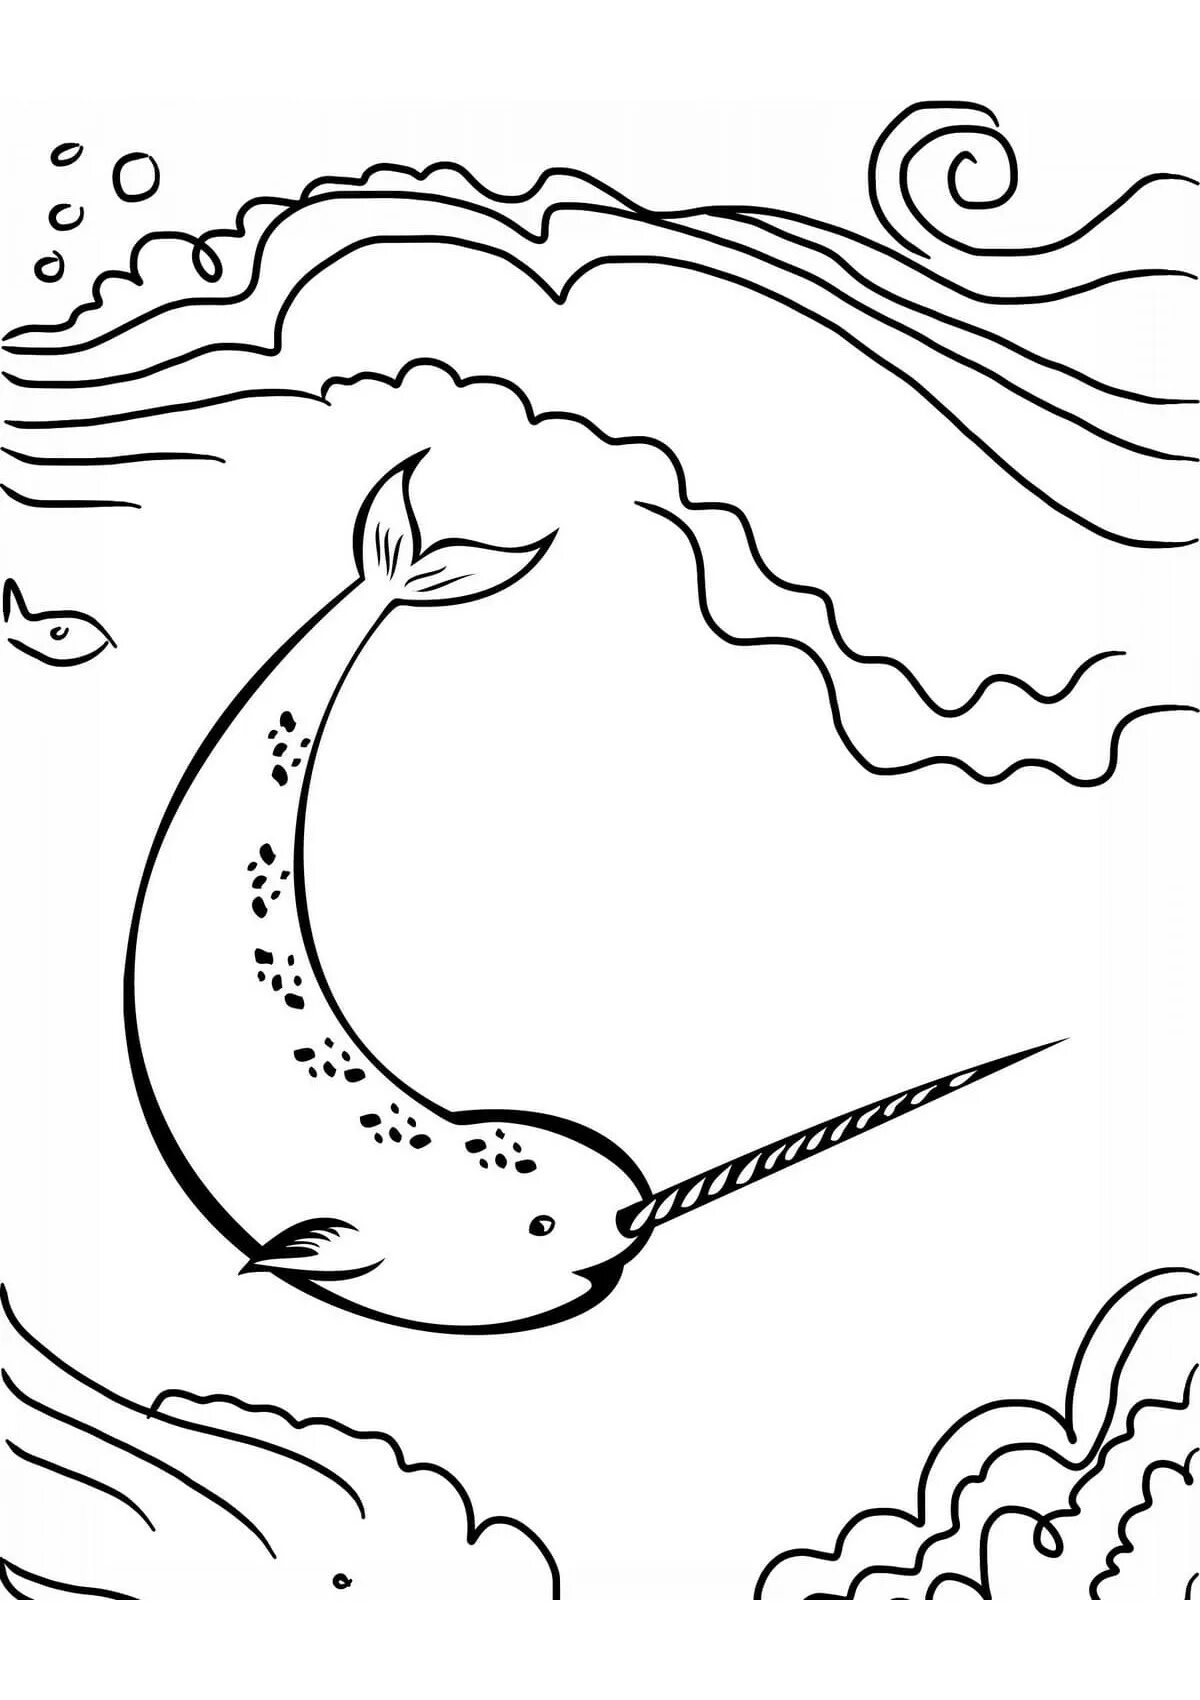 Exciting narwhal coloring book for kids